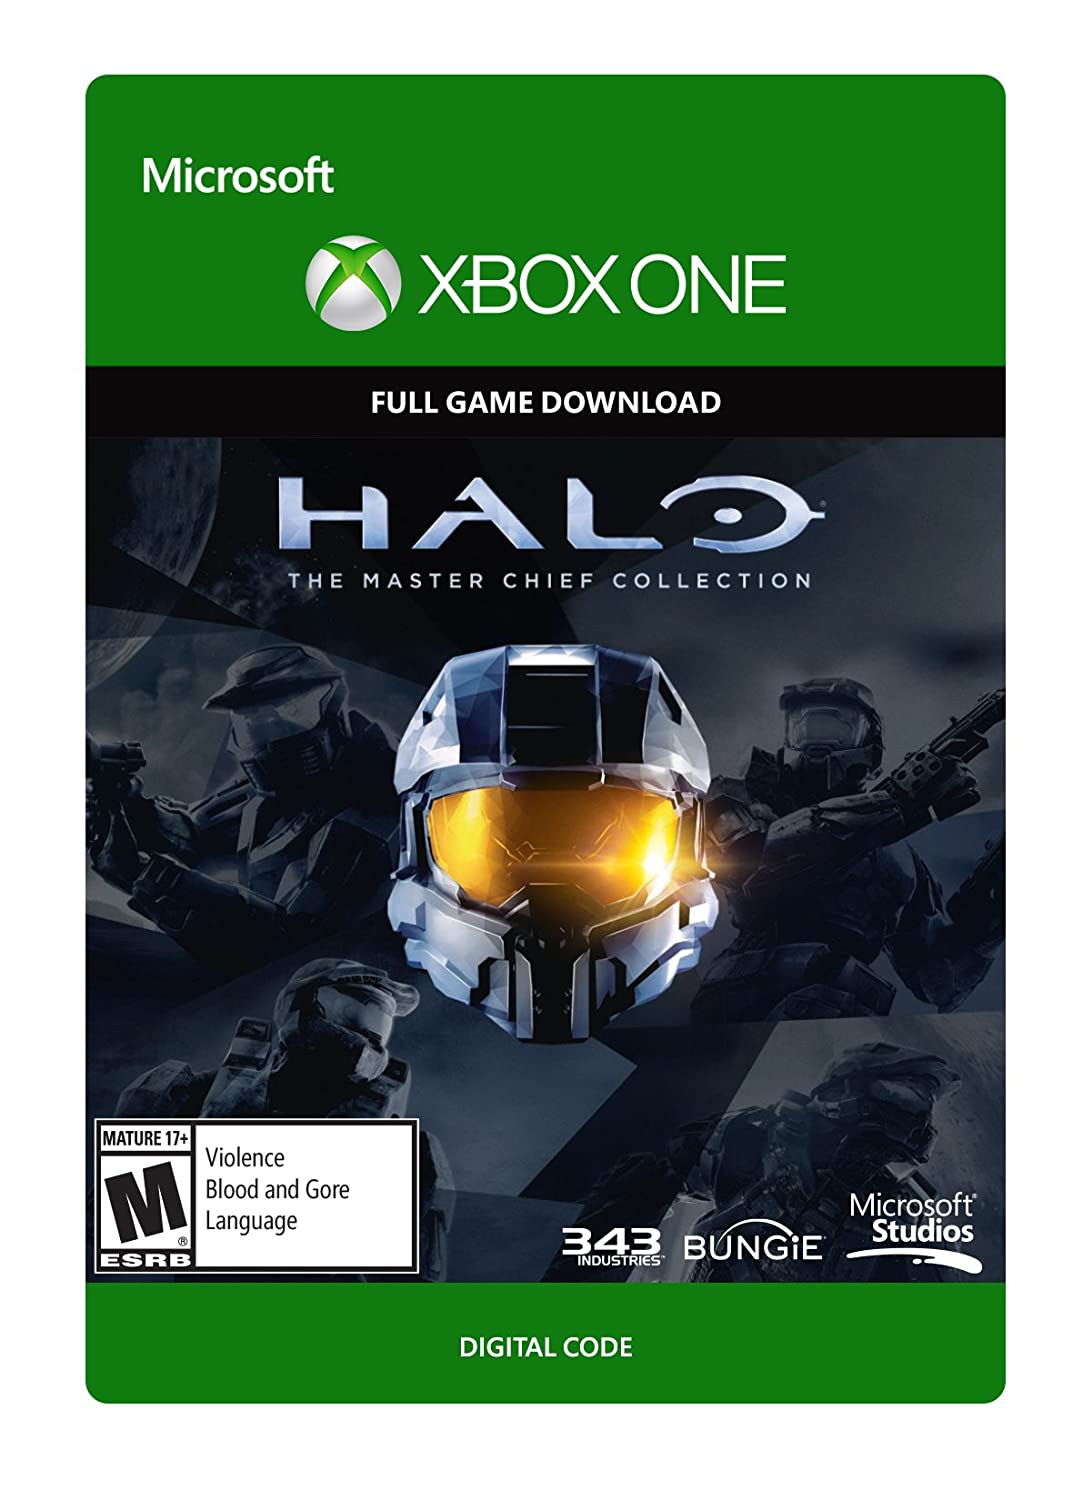 Halo: The Master Chief Collection - Xbox One Digital Code $9.99